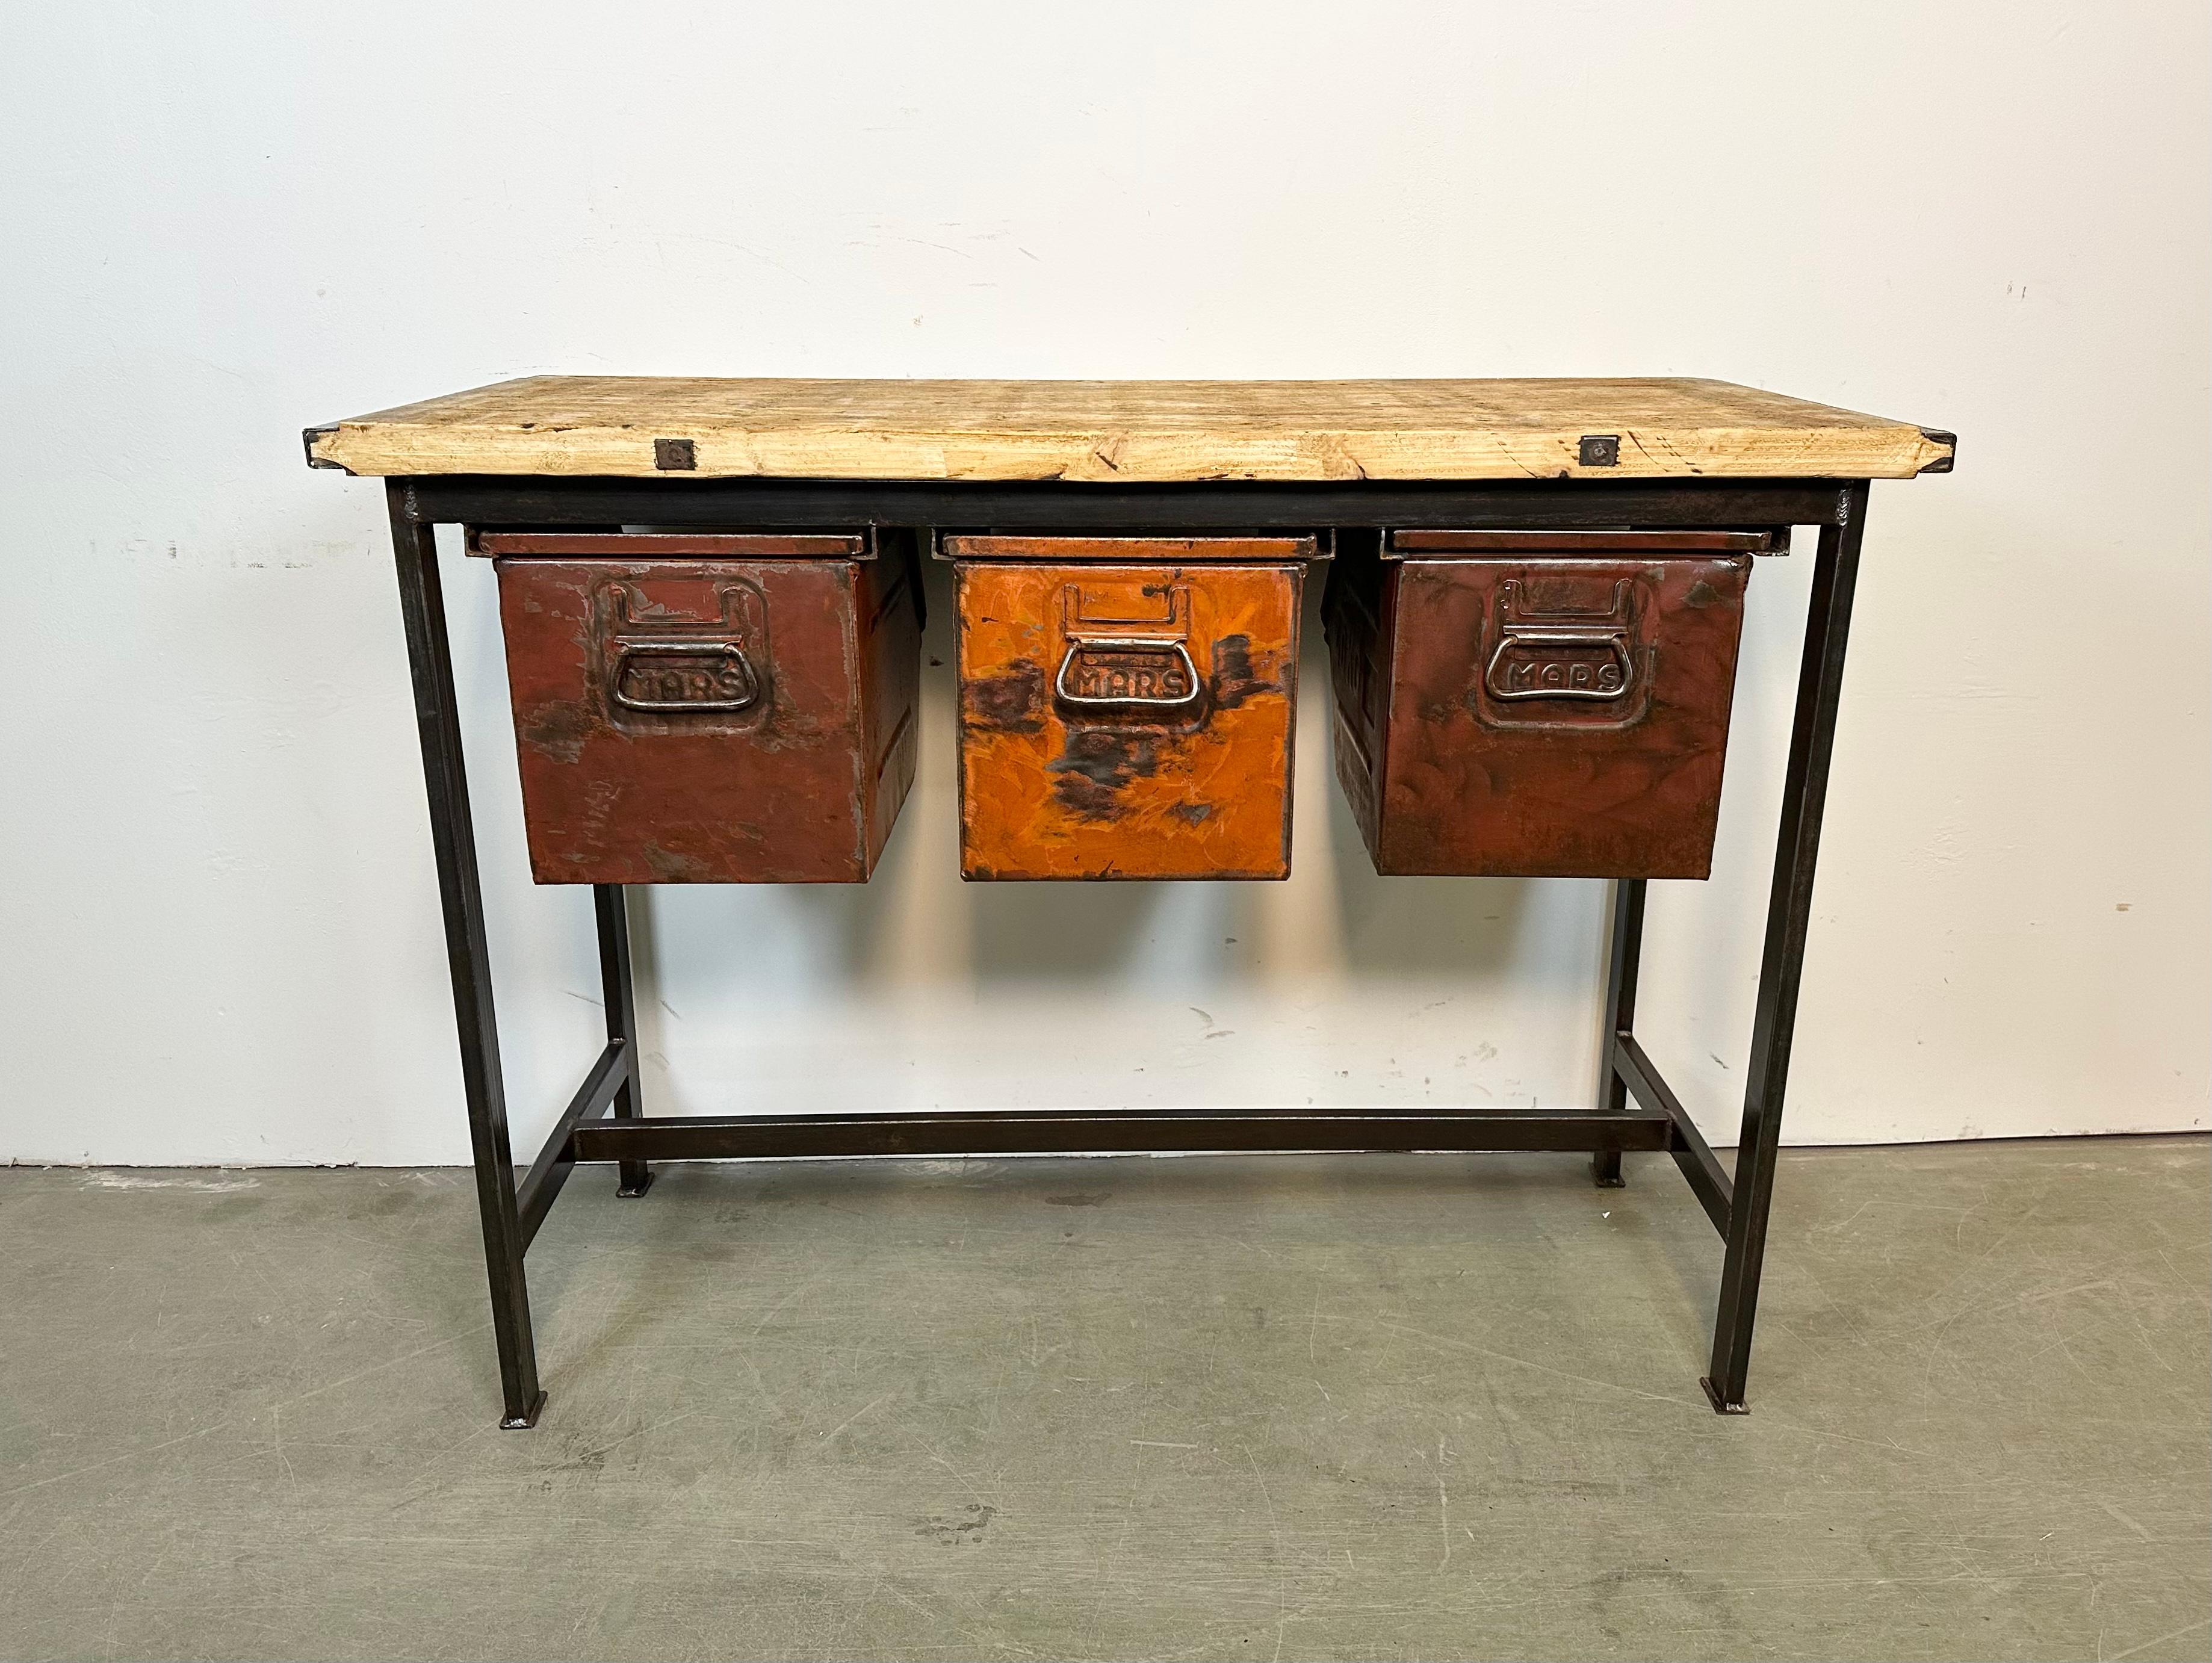 Vintage industrial worktable from the 1960s. It features a black iron construction, solid wooden plate and three iron drawers. Weight: 43 kg.
Drawer dimensions:
Width: 28 cm
Depth: 39 cm
Height: 30 cm.